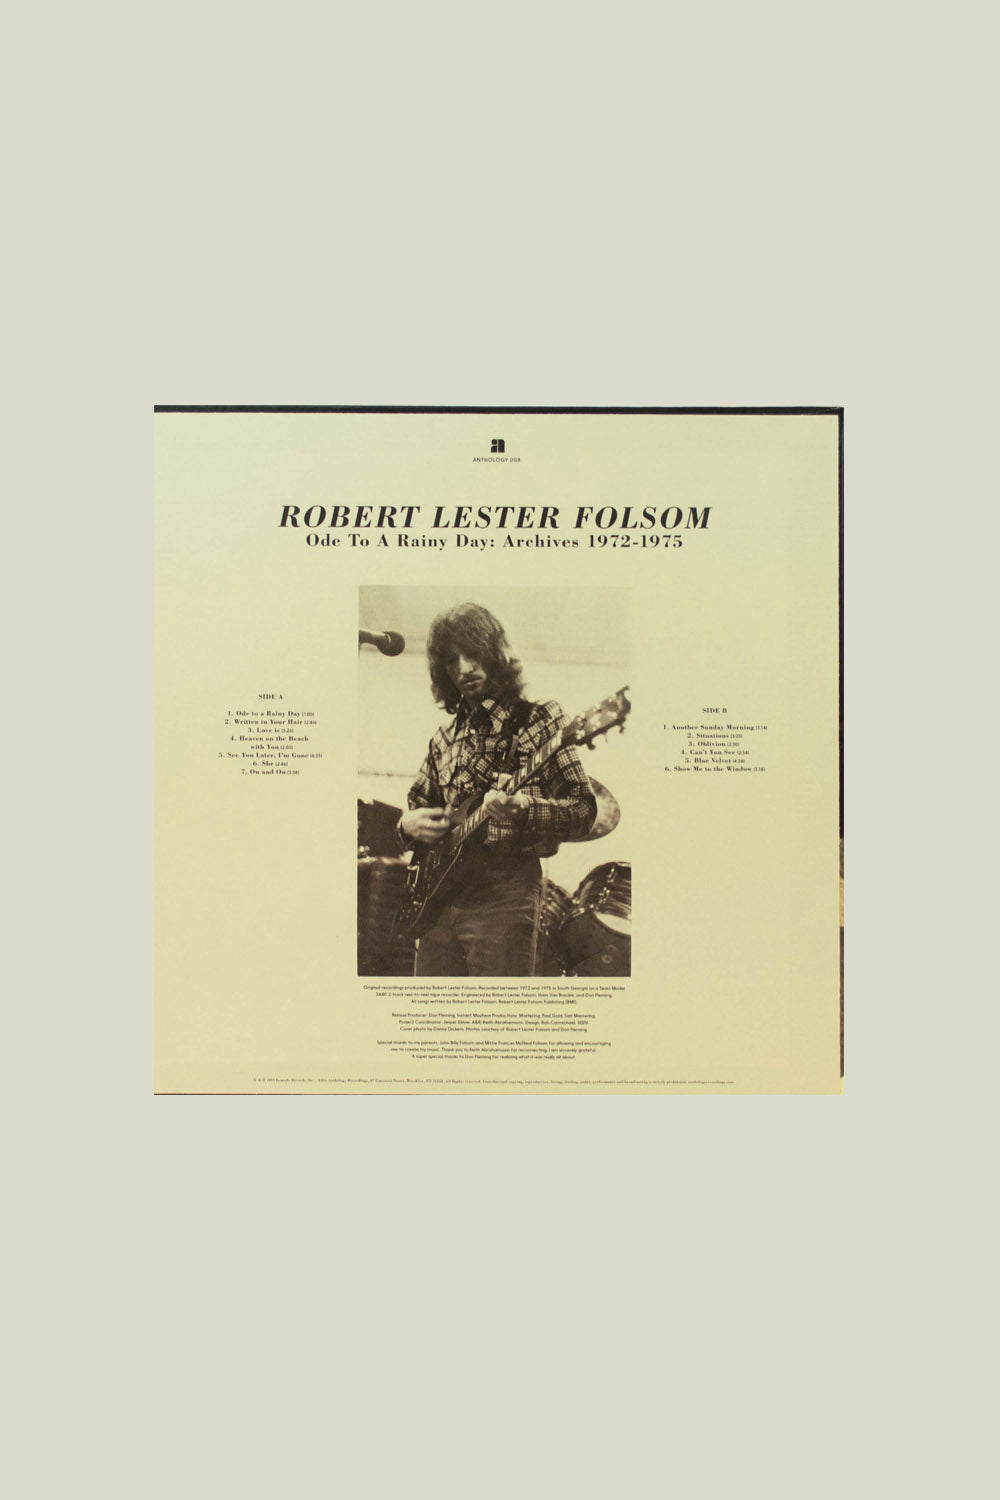 Robert Lester Folsom - Ode To A Rainy Day, Archives 1972-1975 LP